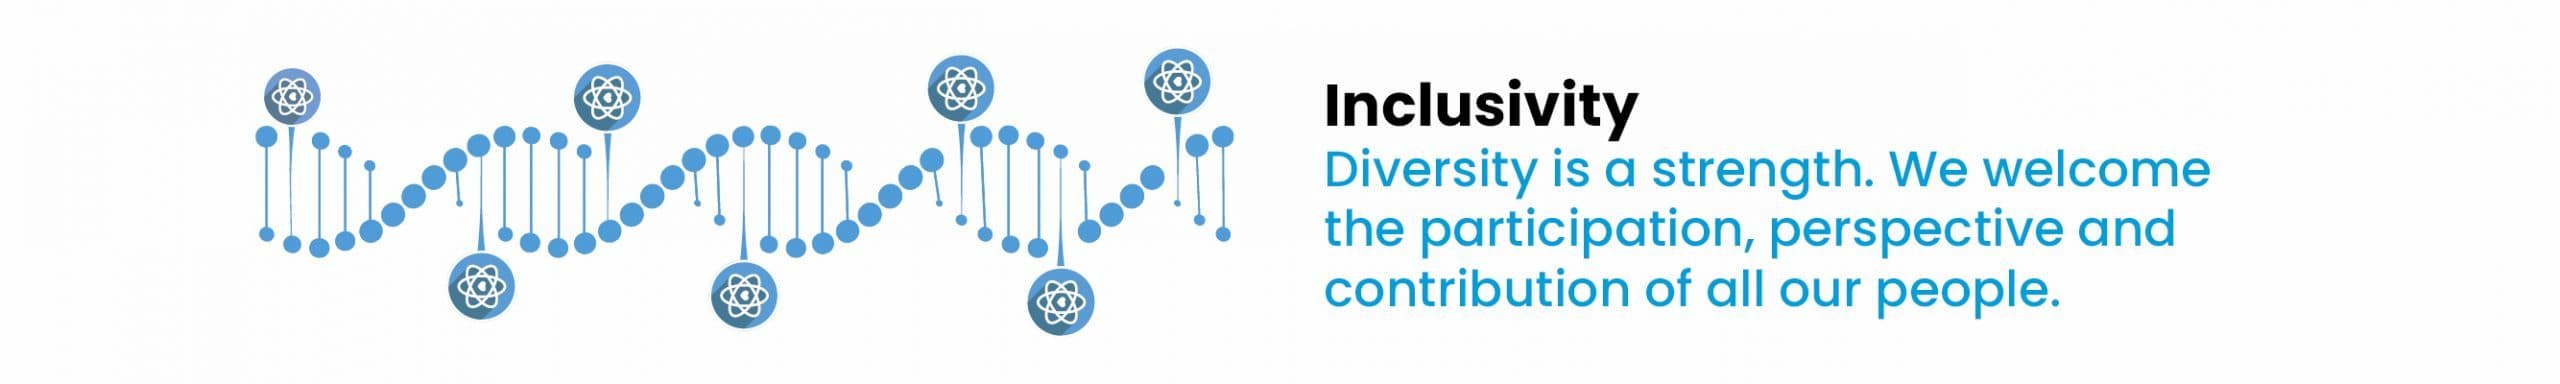 Inclusivity and Diversity Graphic